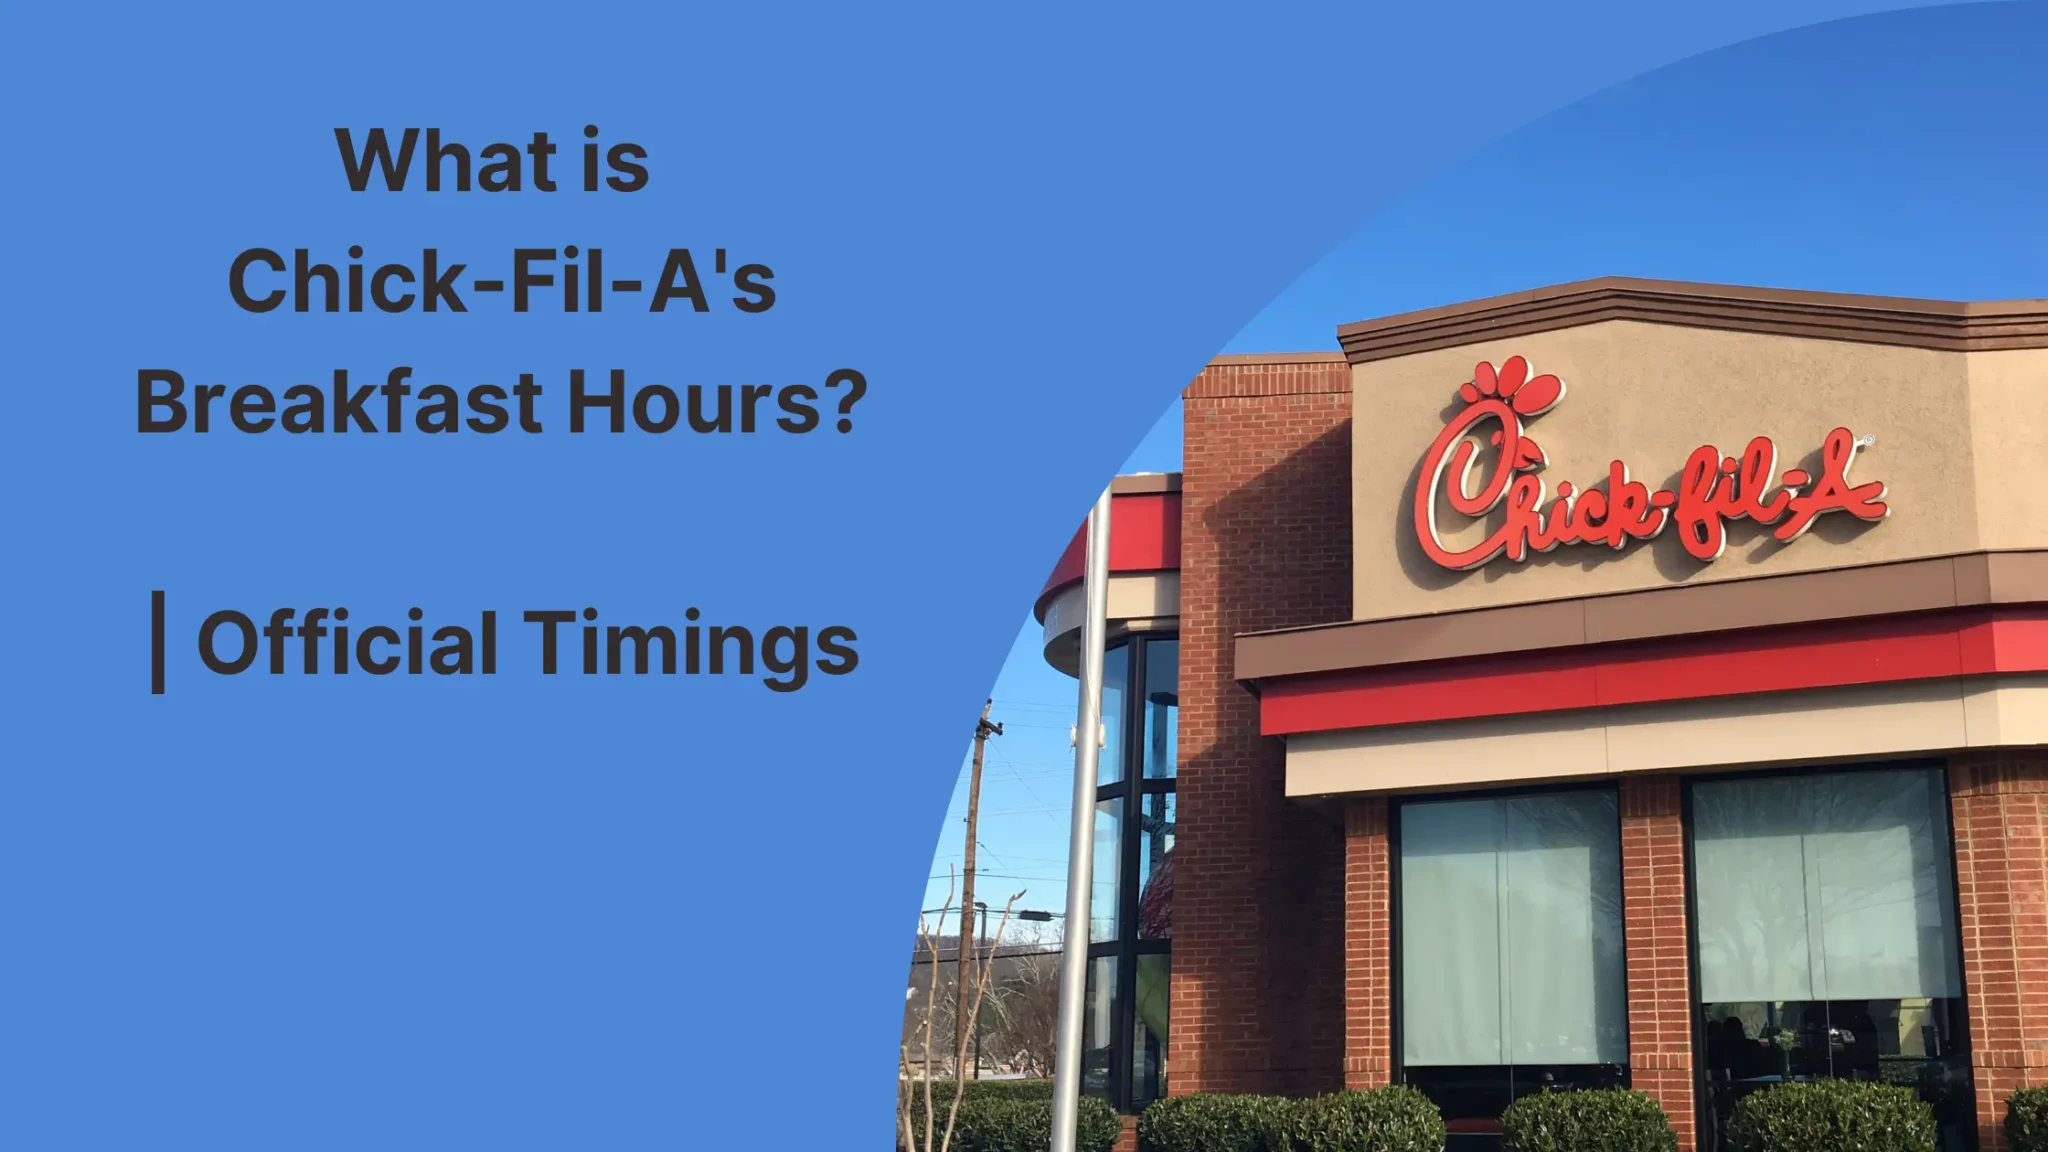 What is Chick-Fil-A's Breakfast Hours?